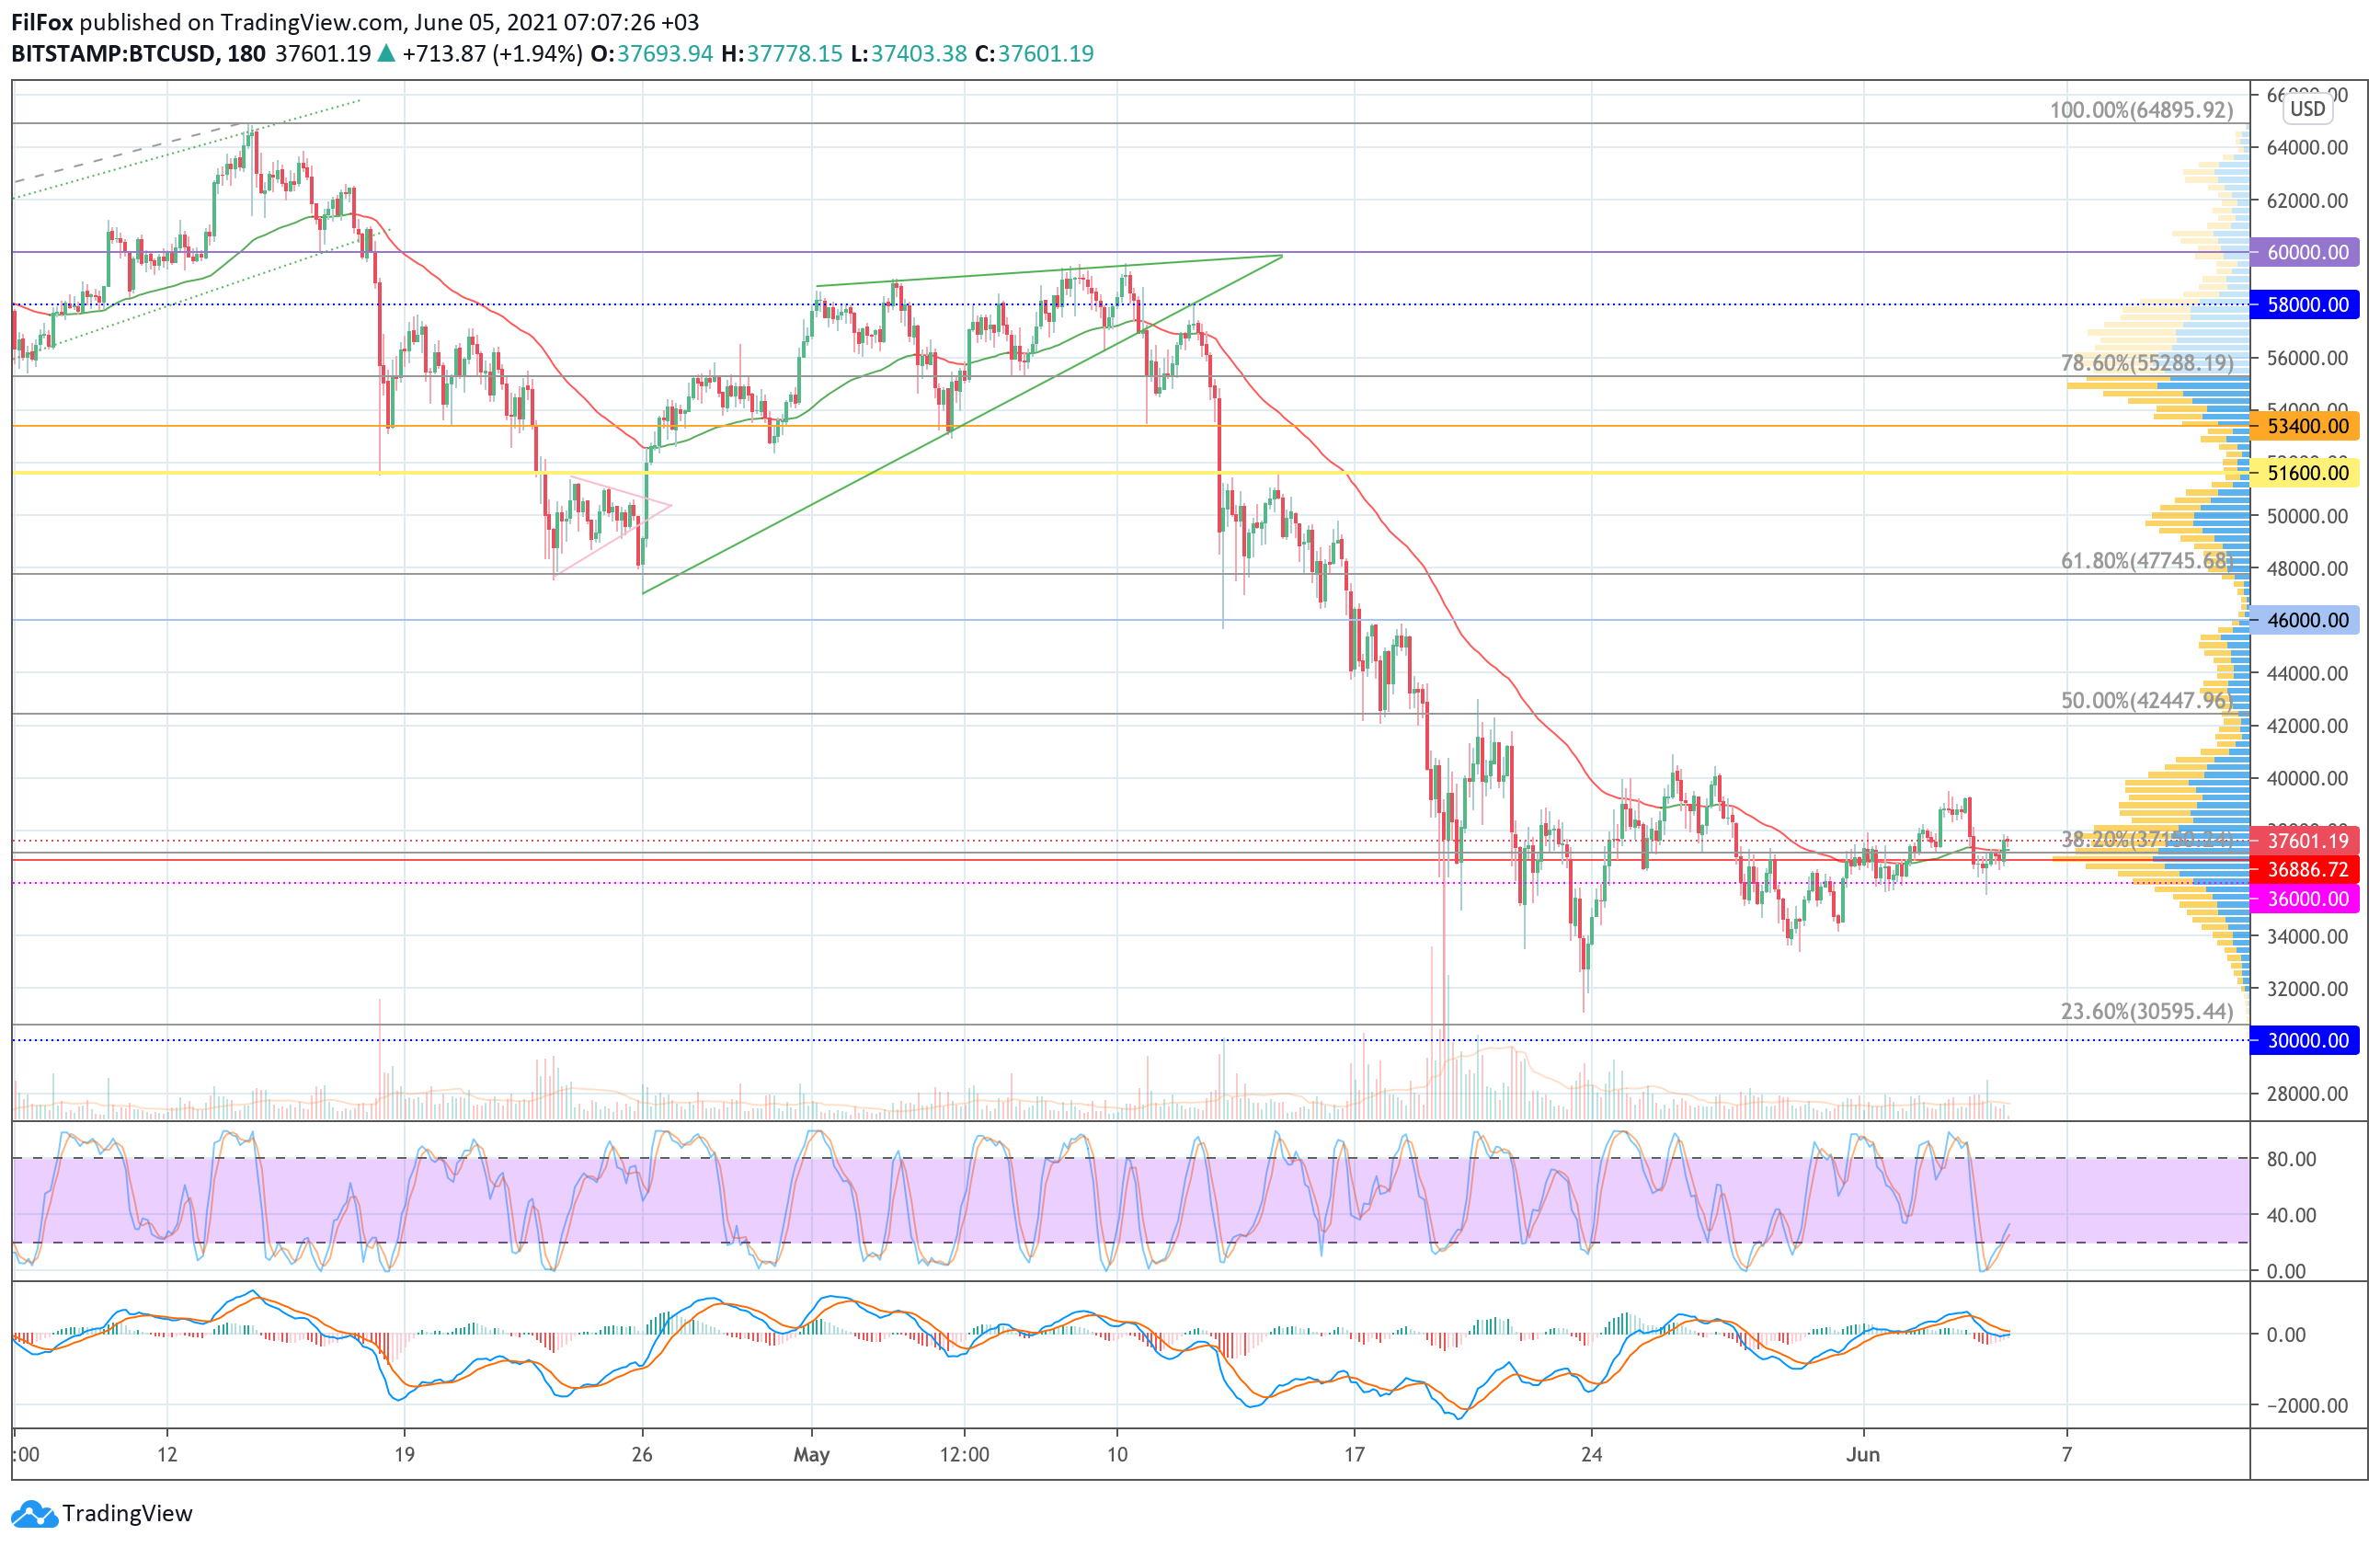 Analysis of prices for Bitcoin, Ethereum, XRP for 06/05/2021